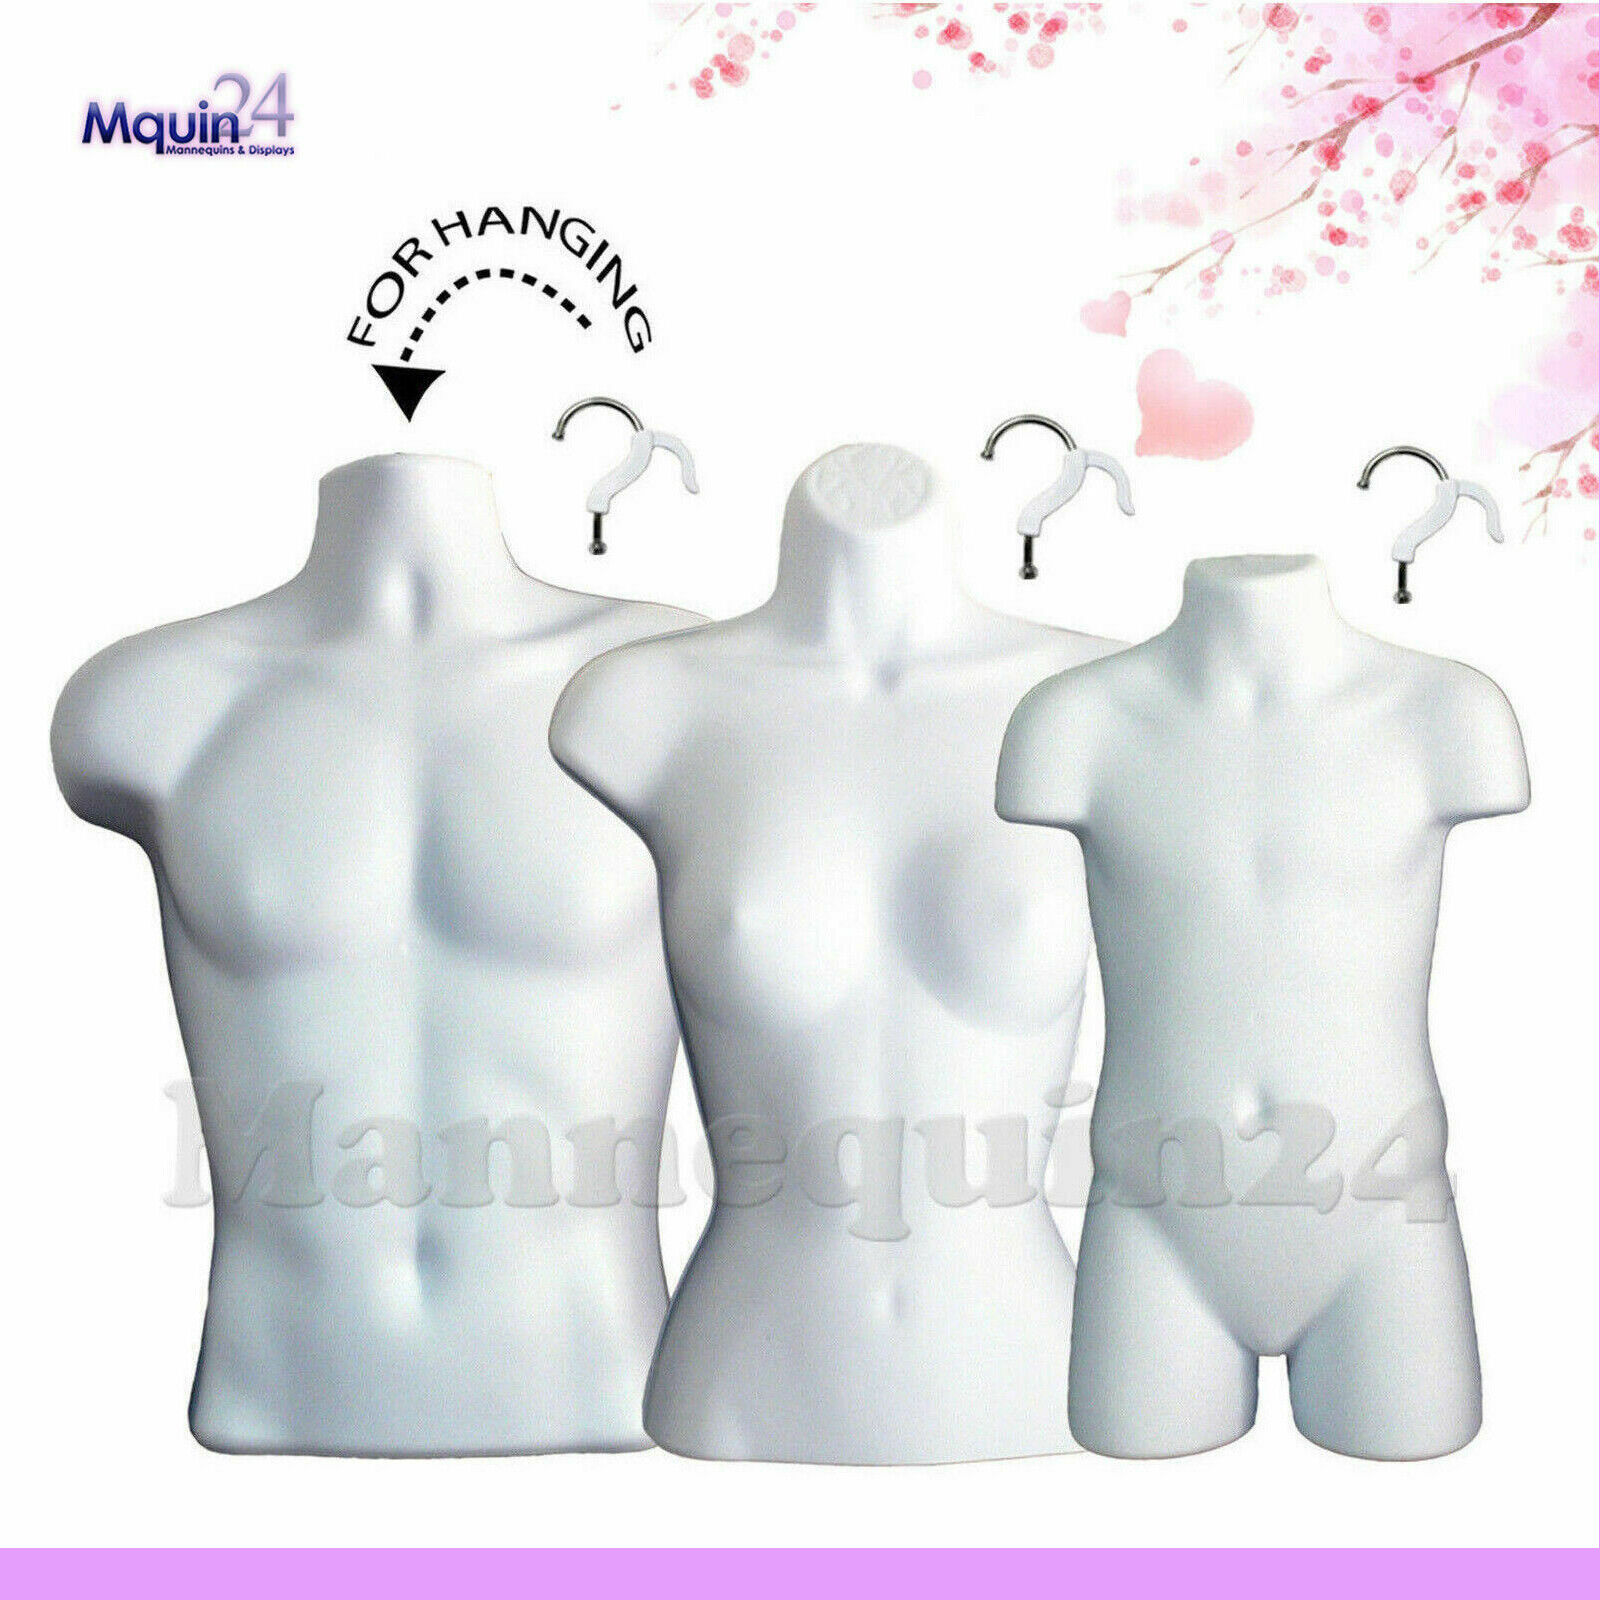 Mannequin Male National uniform free shipping Female Childs Torso Set White - 3 Hanging Fixed price for sale Plastic